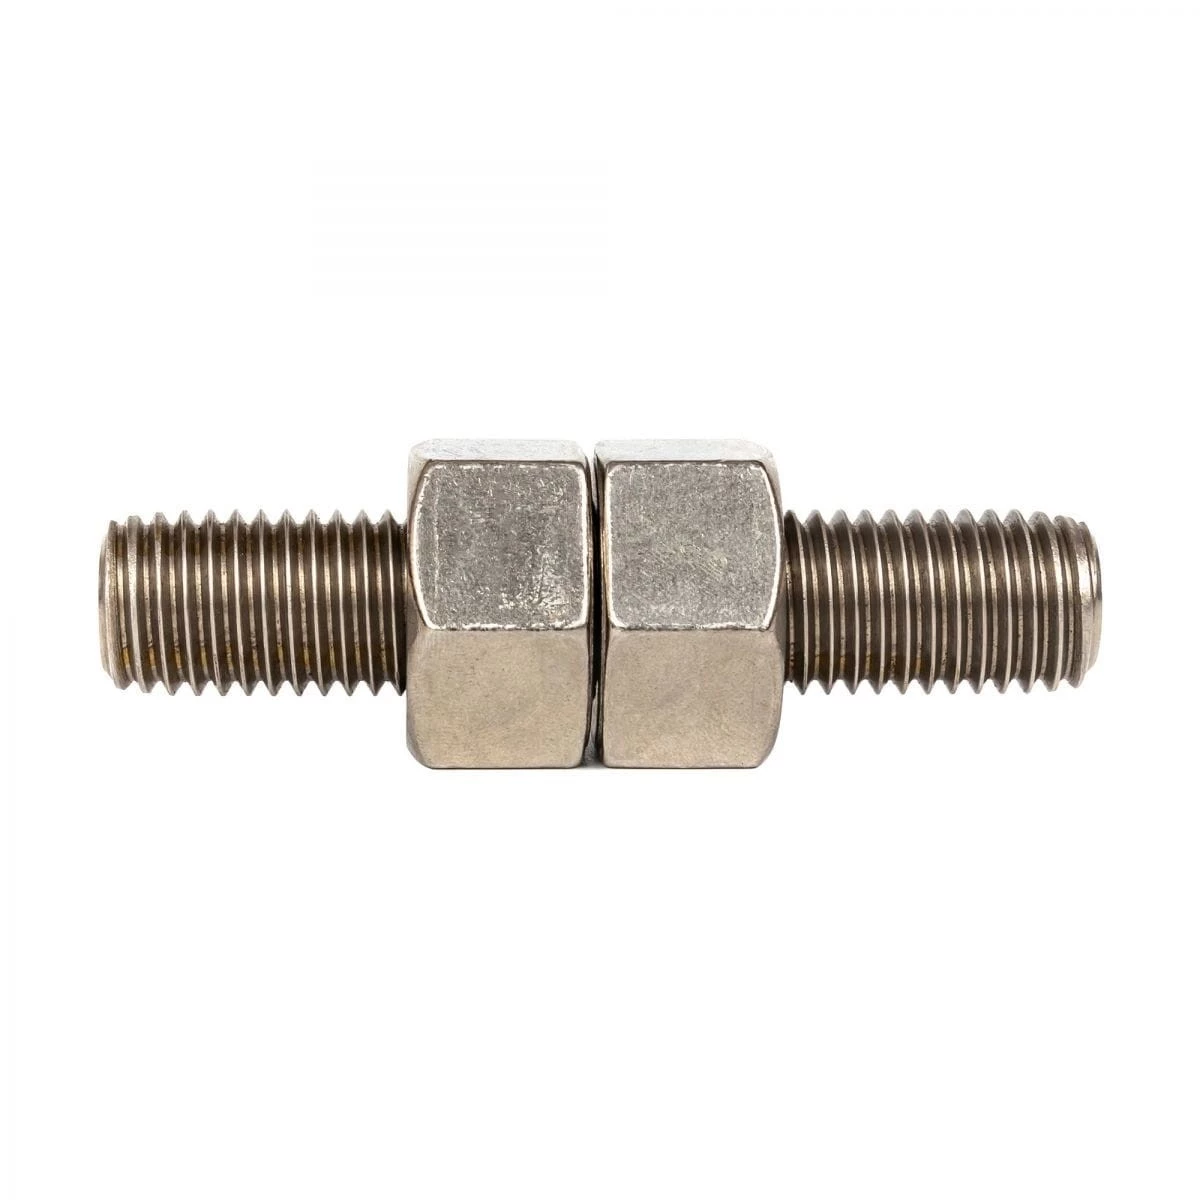 Stainless Steel 304 Stud Bolt, Grade 10.9, 7/8 Inch, 9 UNC